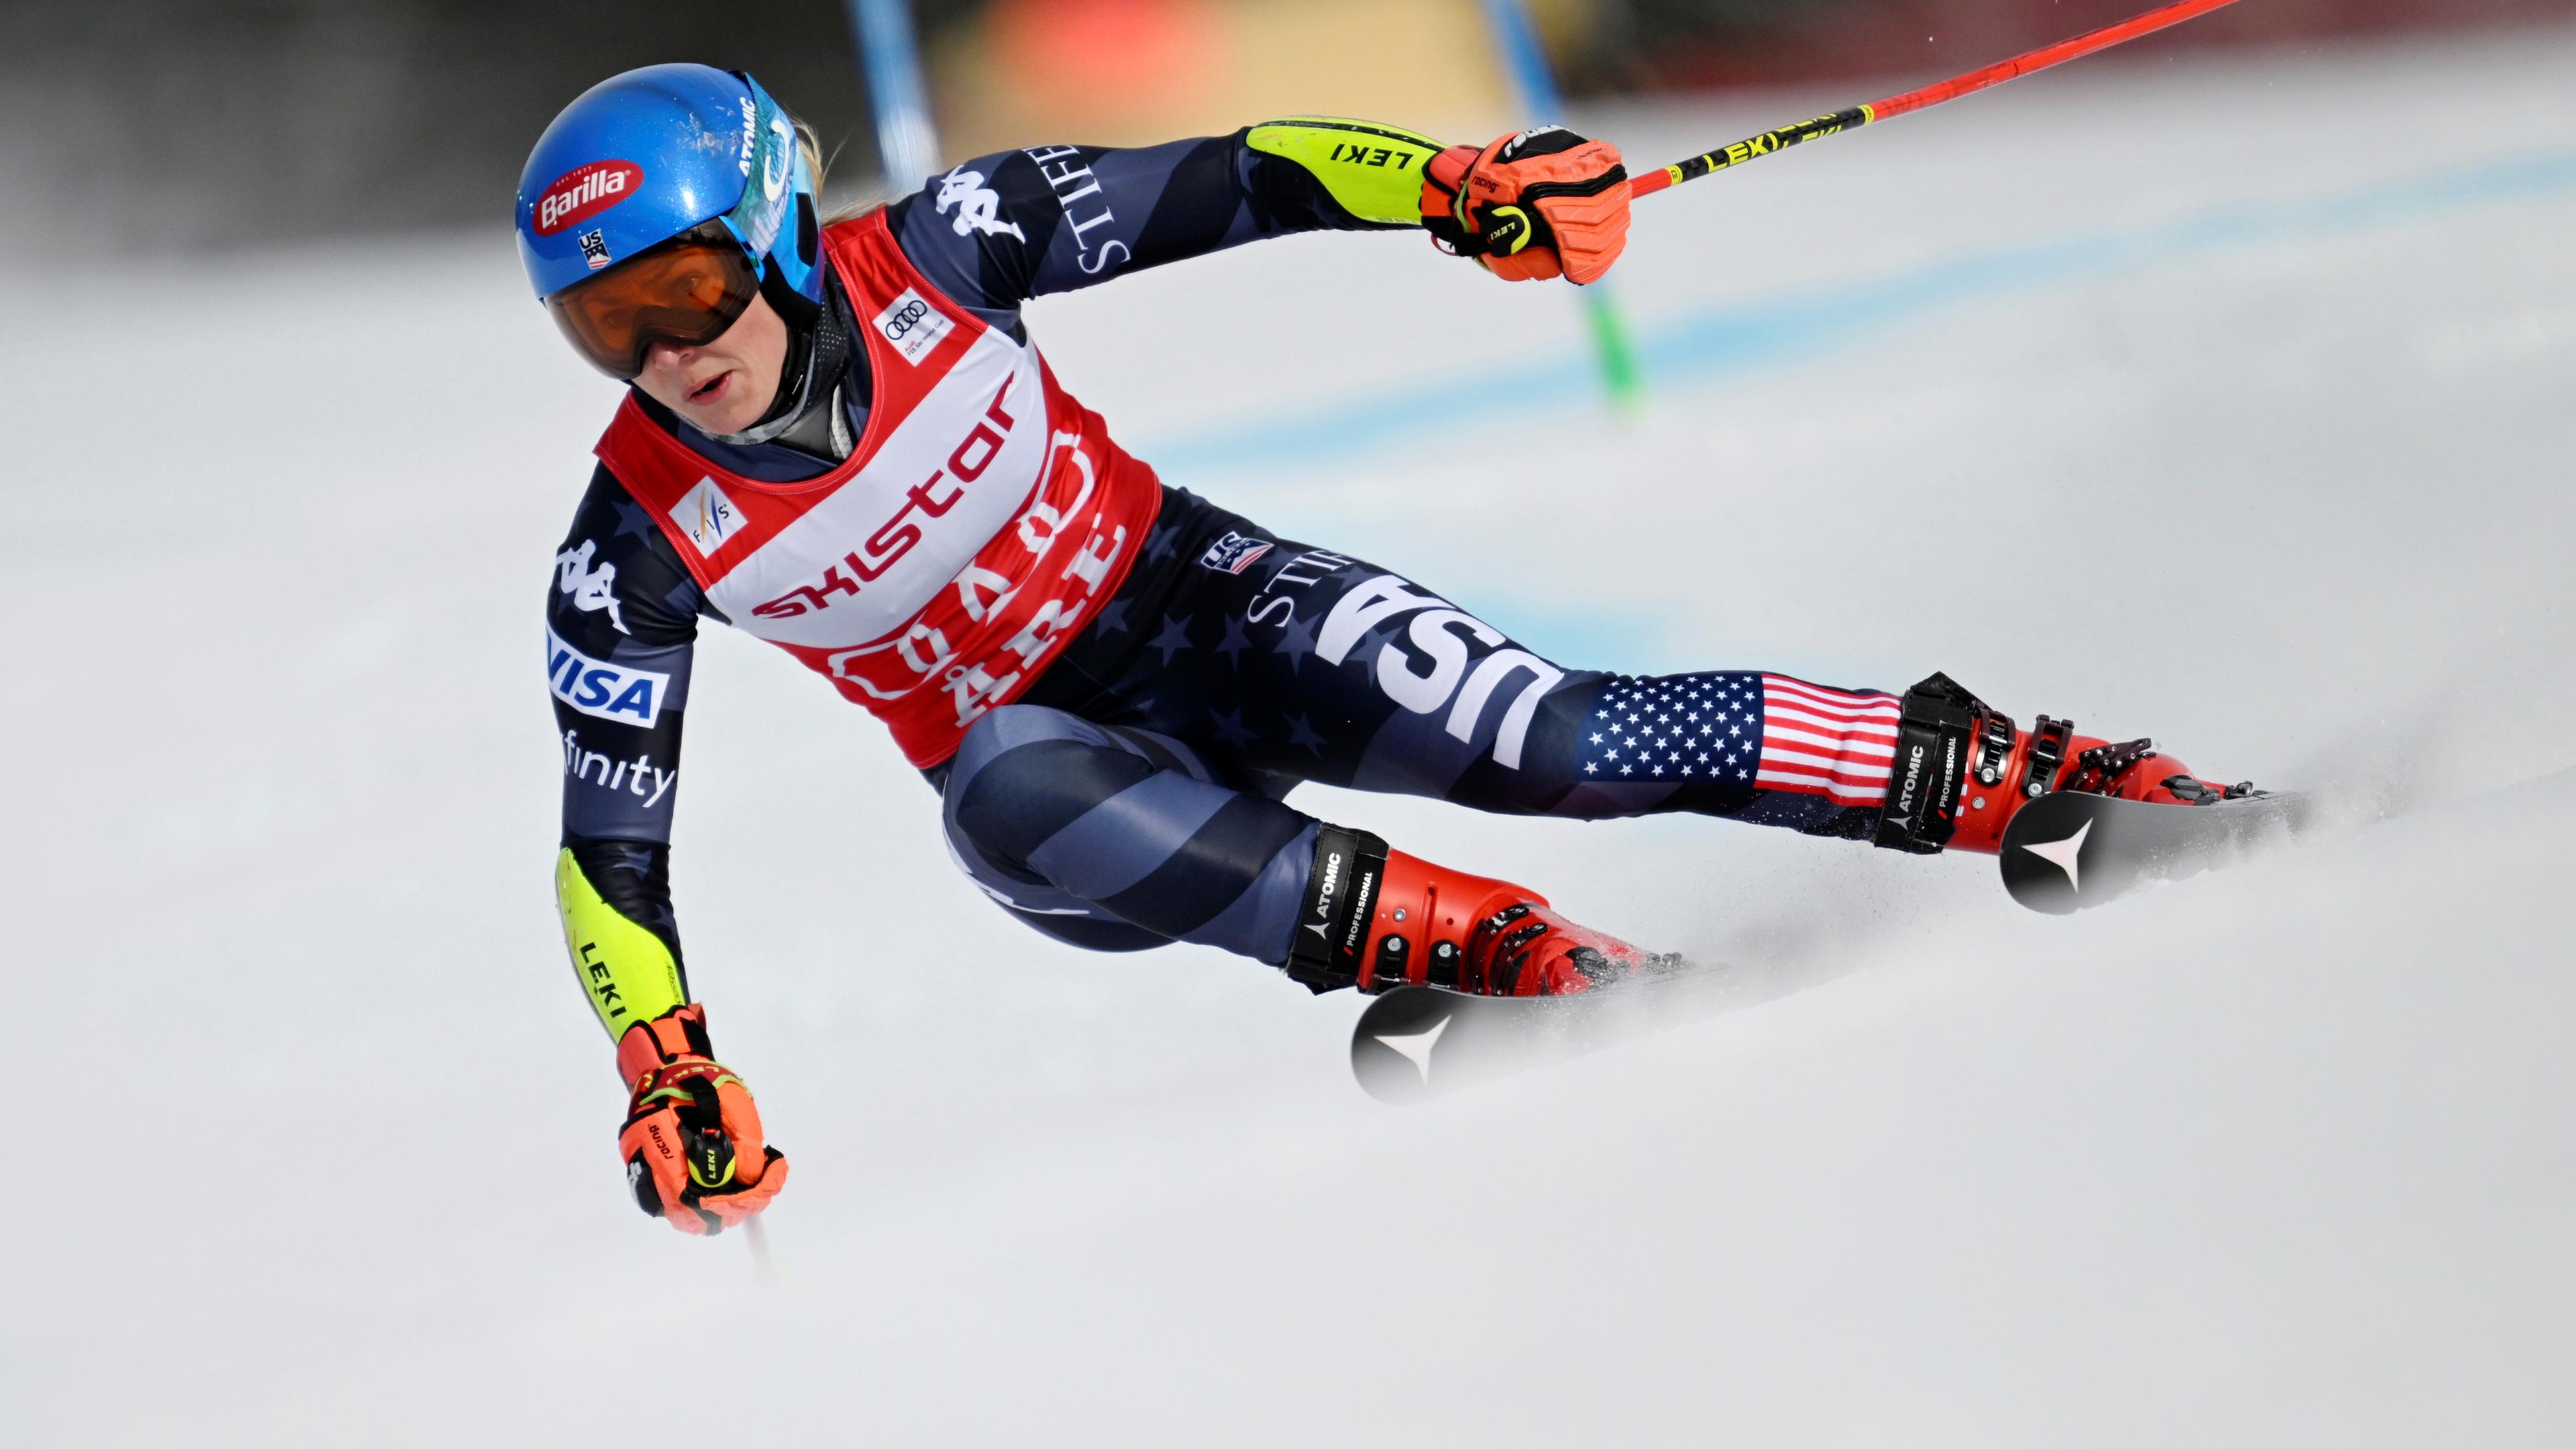 Mikaela Shiffrin in AKtion beim FIS Alpine Skiing World Cup in Are